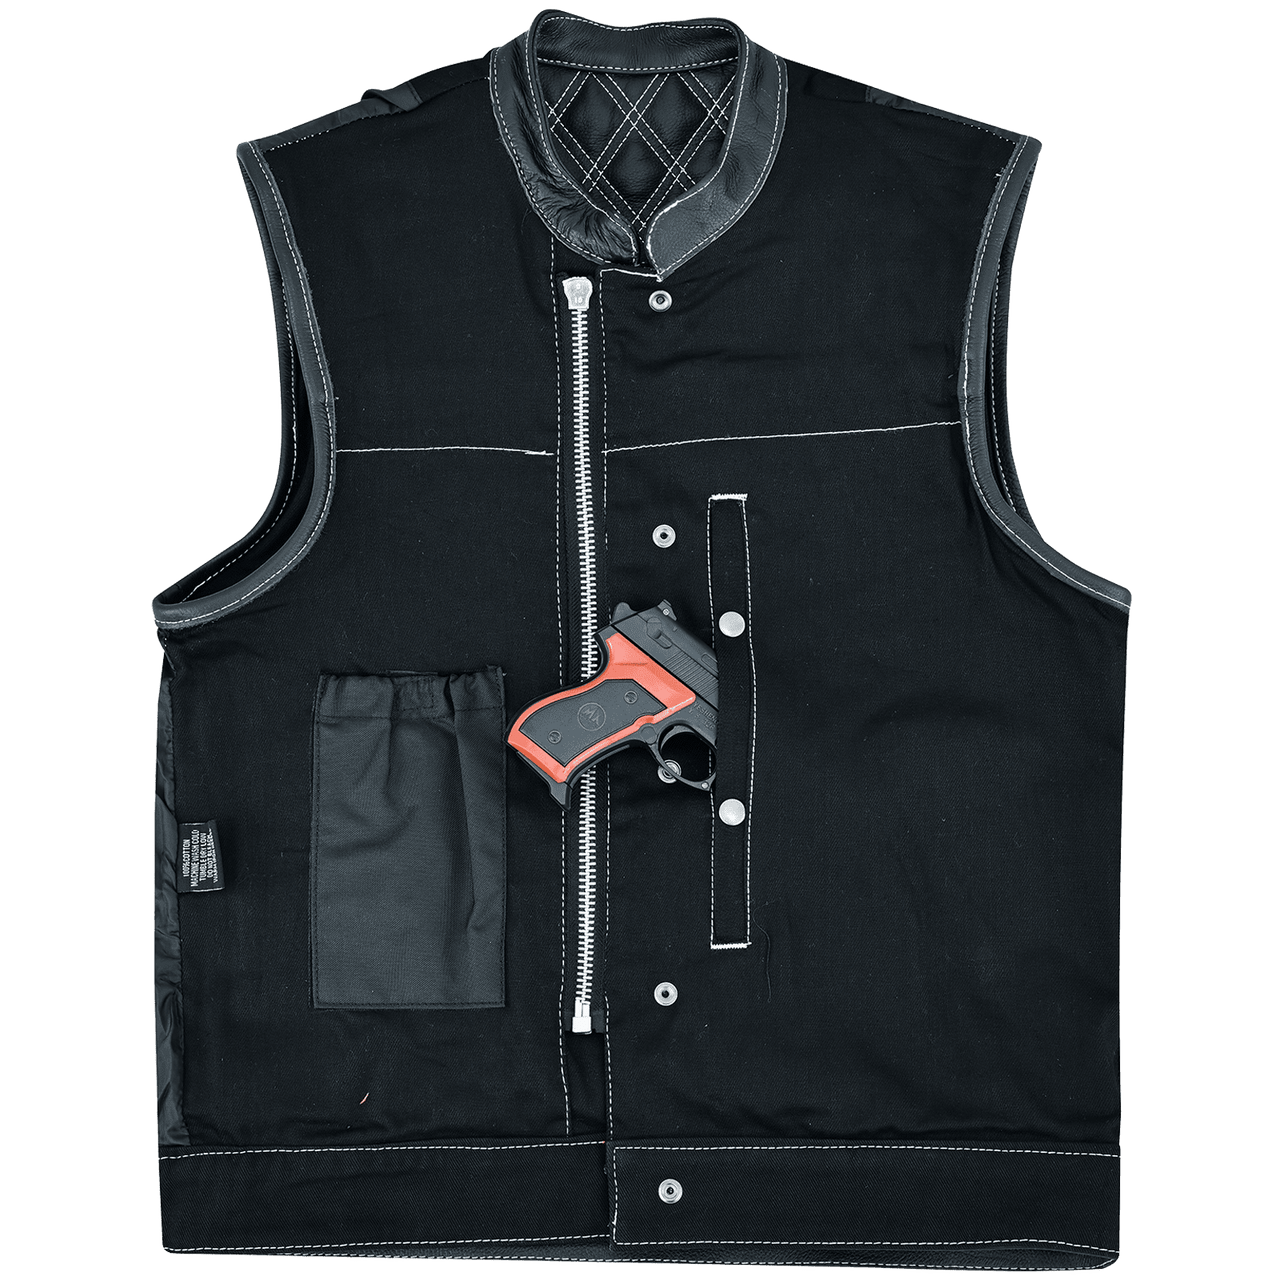 Vance-Leathers-VB924WH-Men's-Denim-Leather-Motorcycle-Vest-with-White-Stitching-conceal-carry-pocket